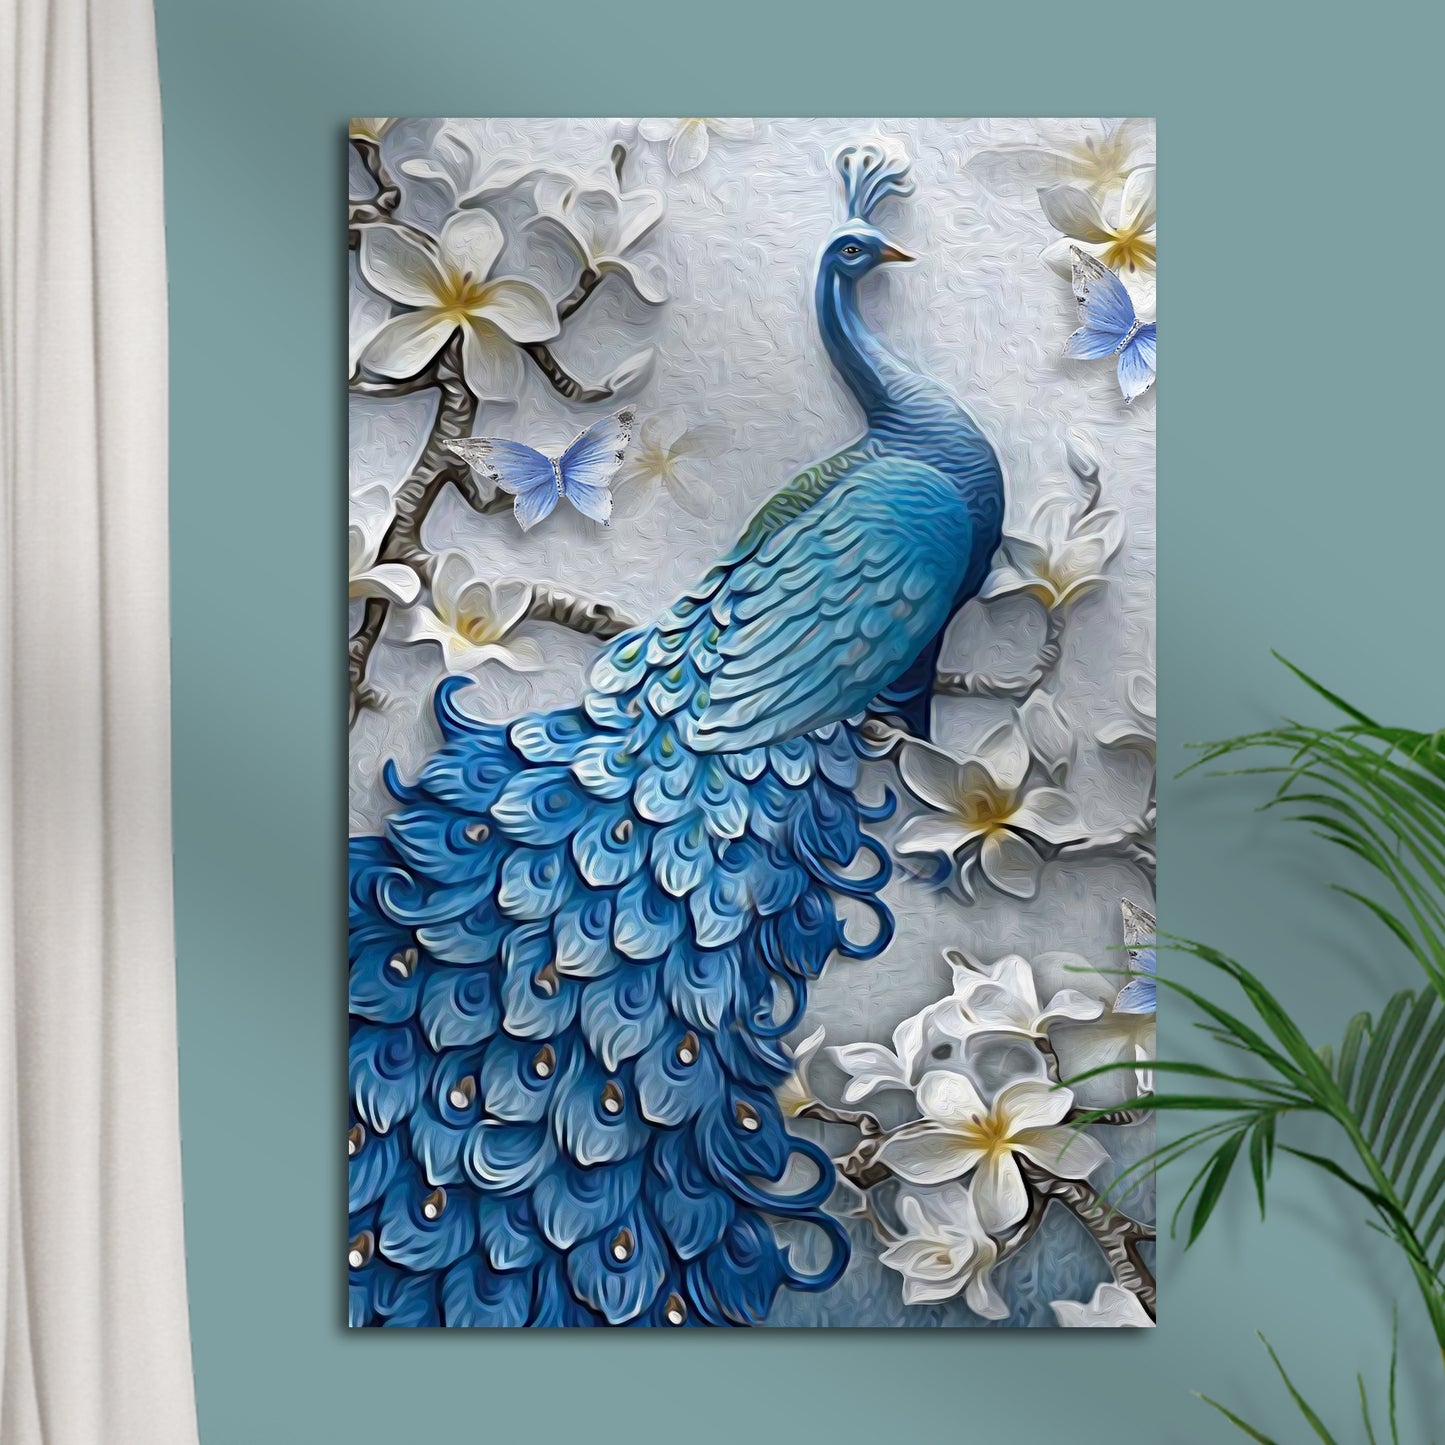 Elegant Peacock and White Magnolias Painting Portrait Canvas Wall Art Style 1 - Image by Tailored Canvases